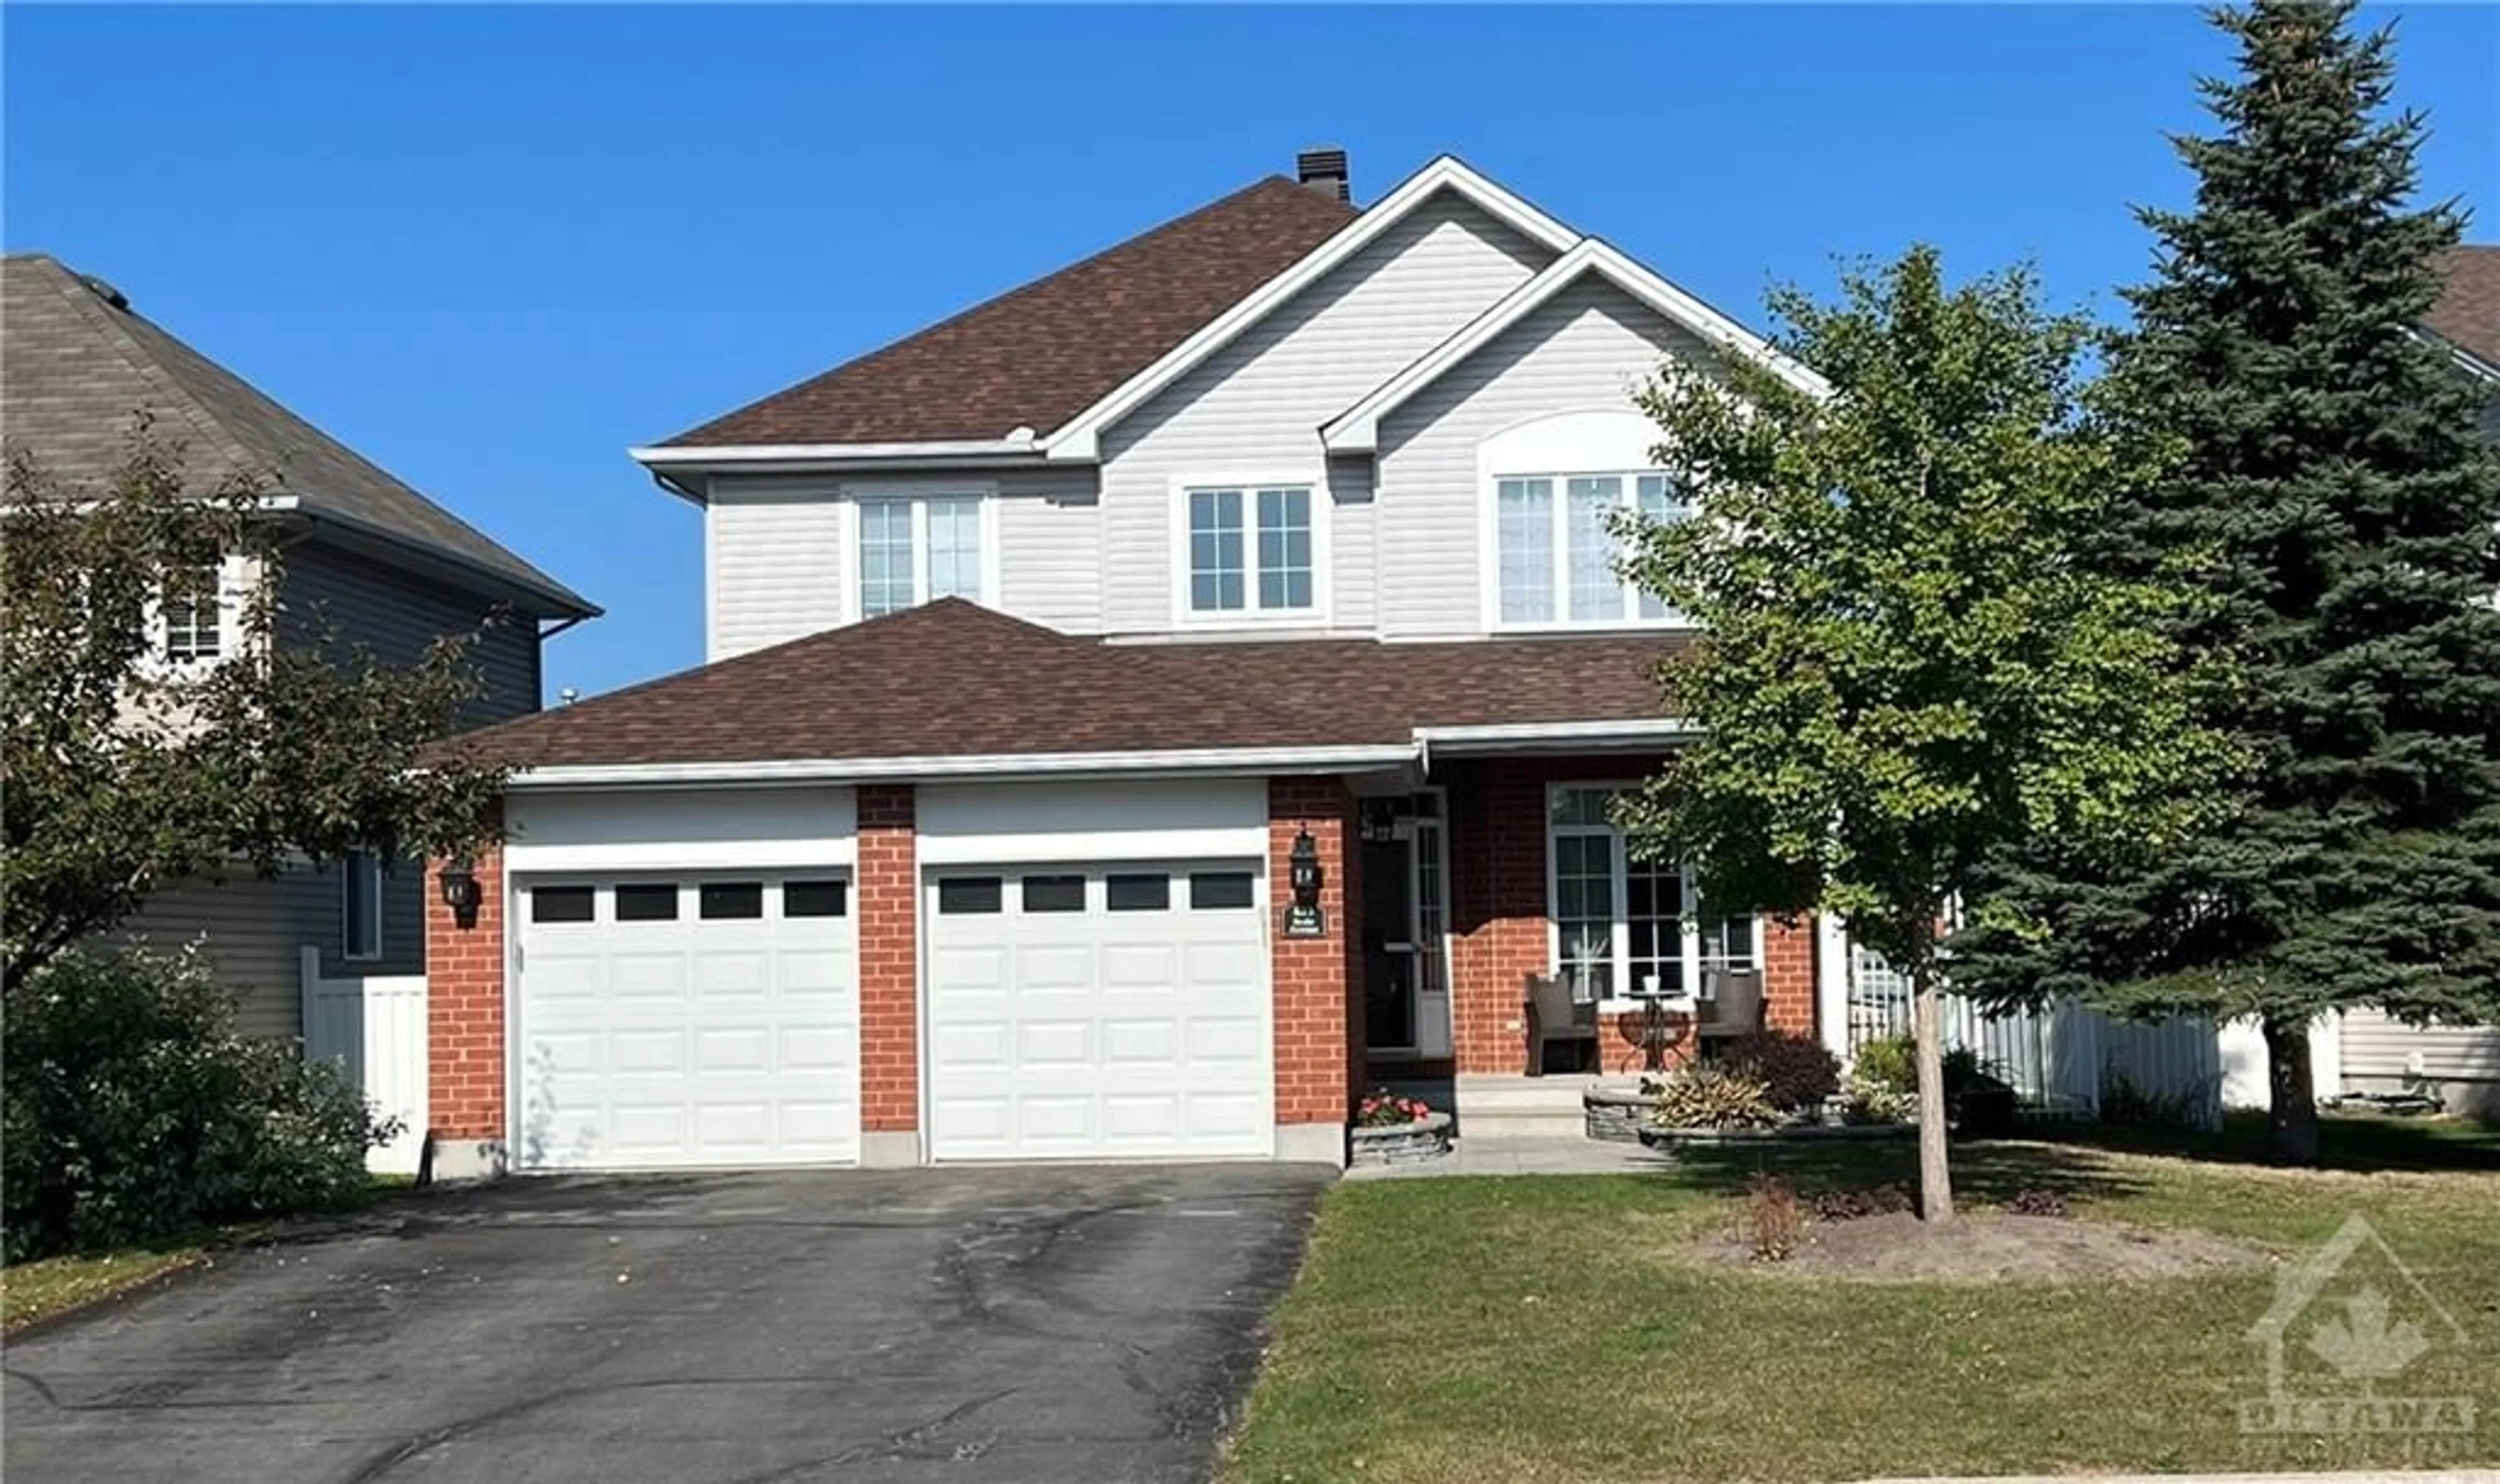 Home with vinyl exterior material for 853 SCALA Ave, Orleans Ontario K4A 4M6